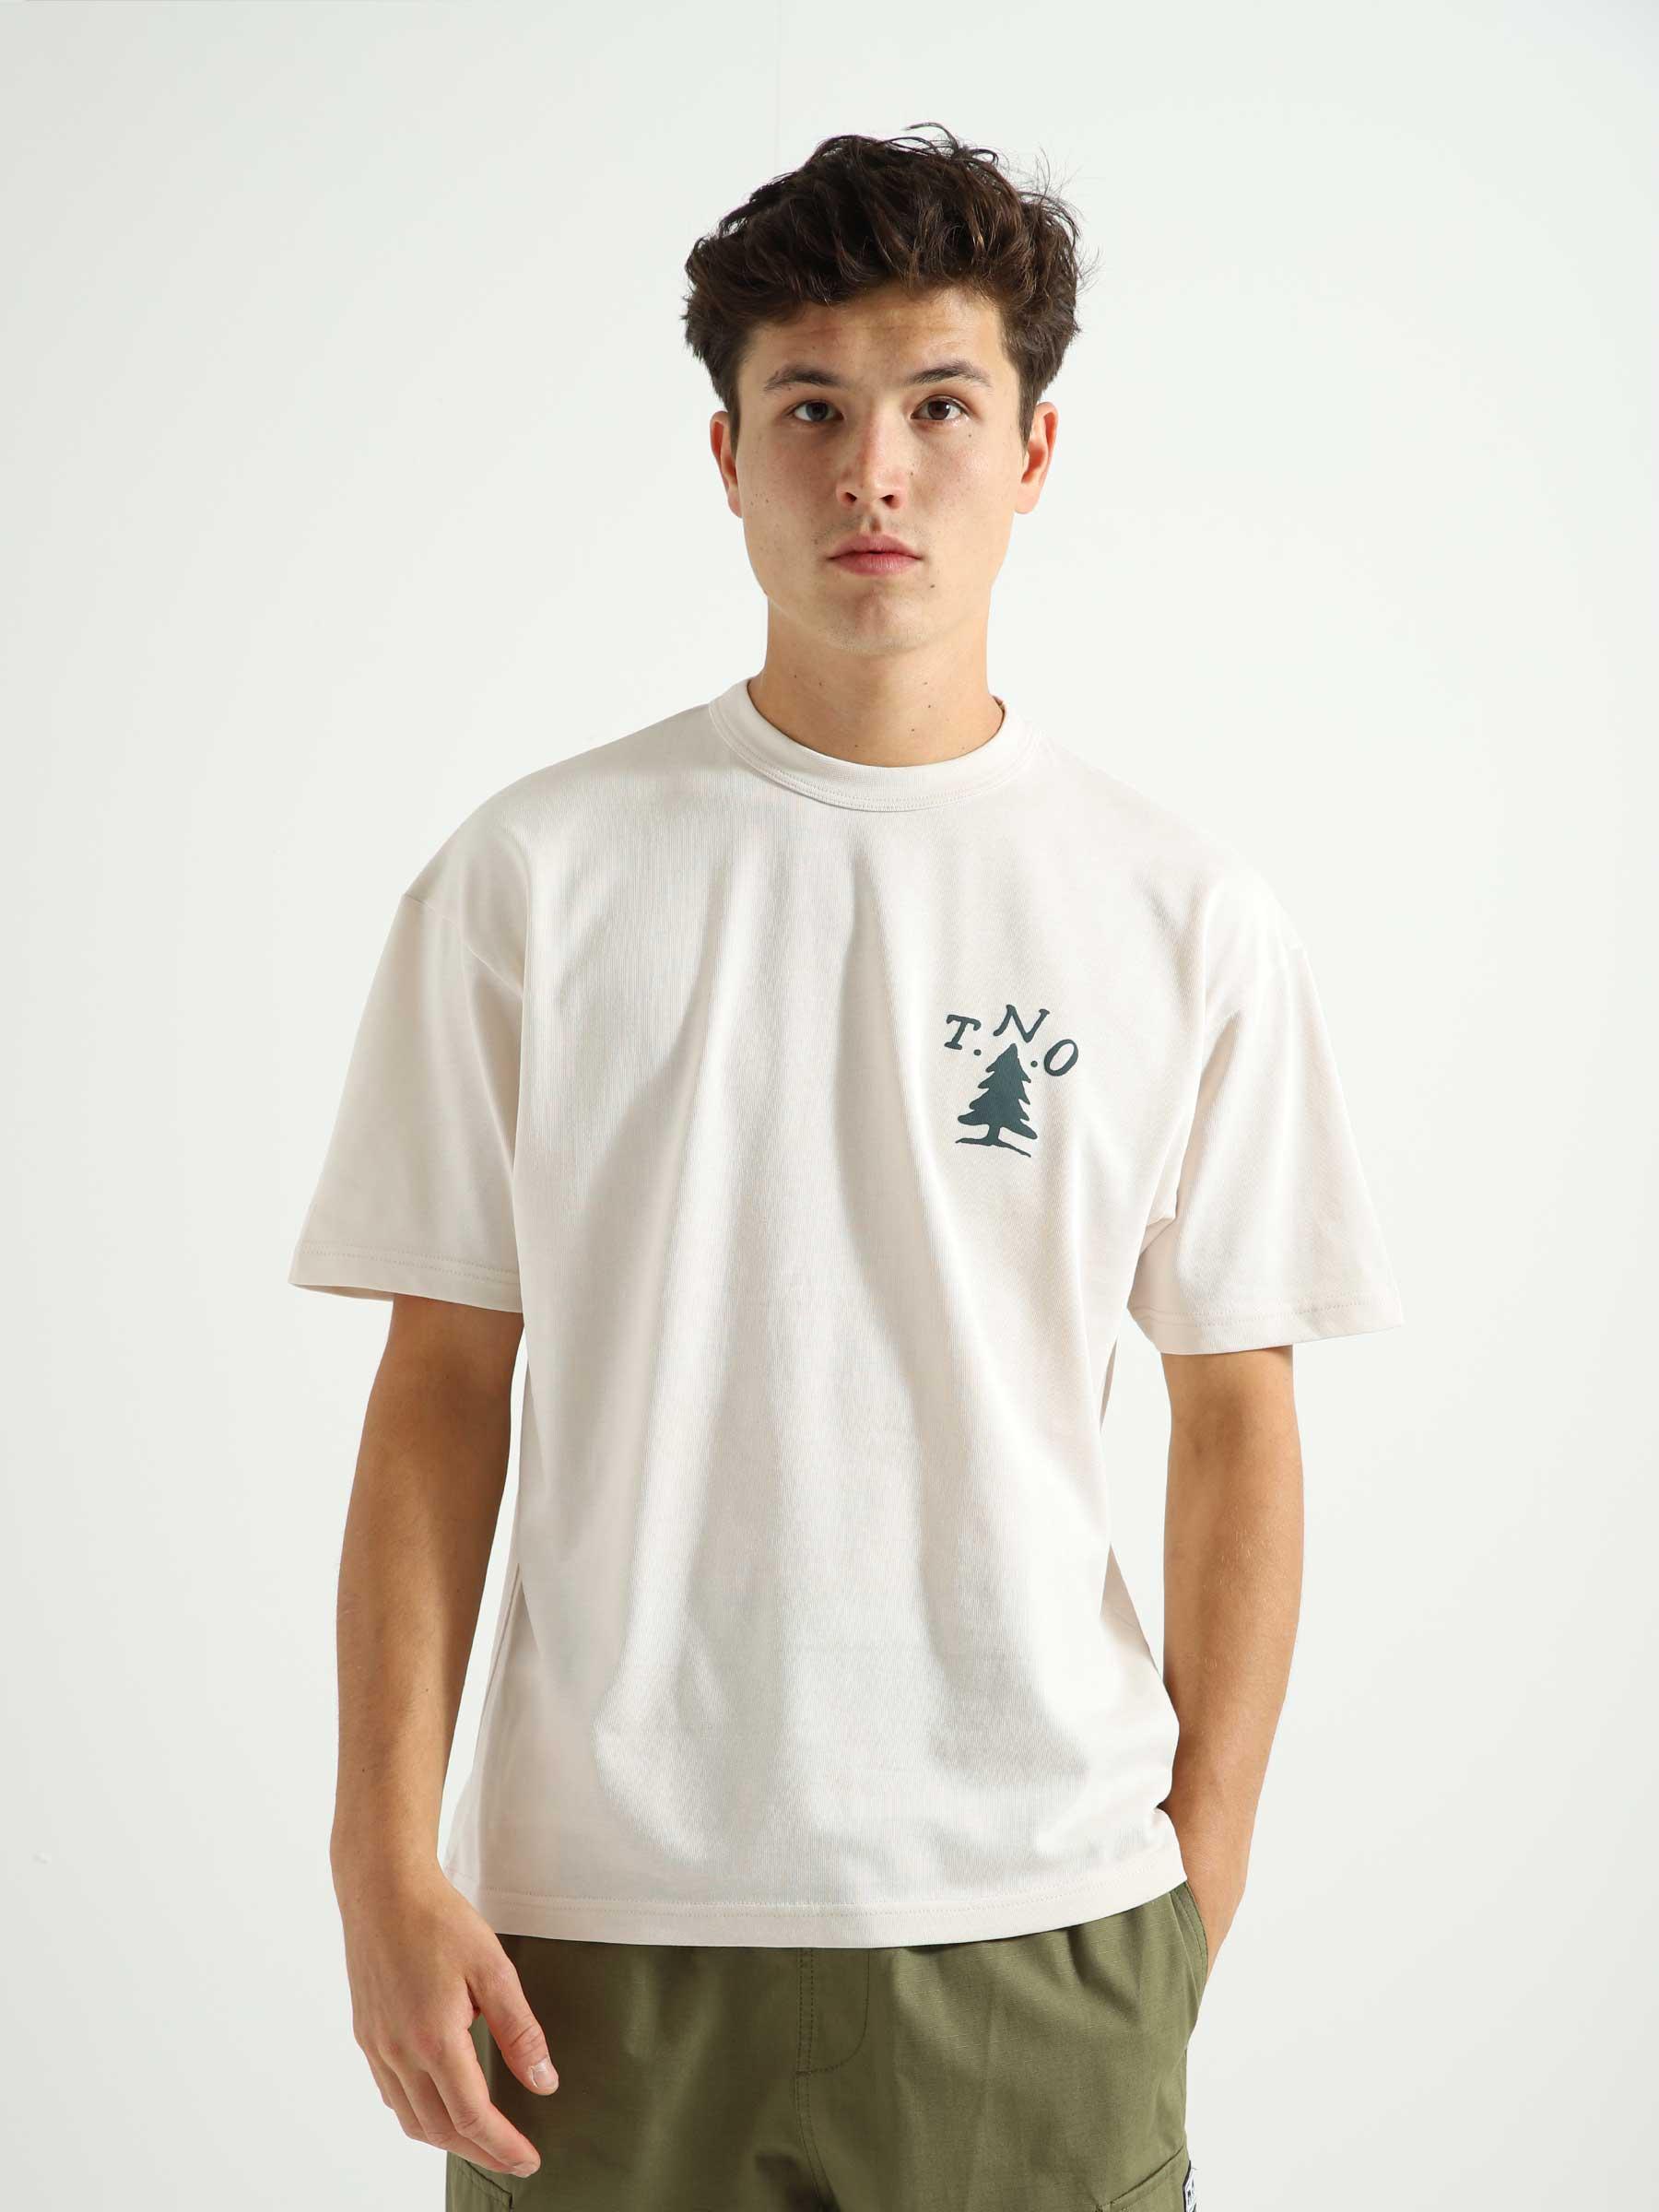 Survival Book T-shirt White Sand 100SBF23.005